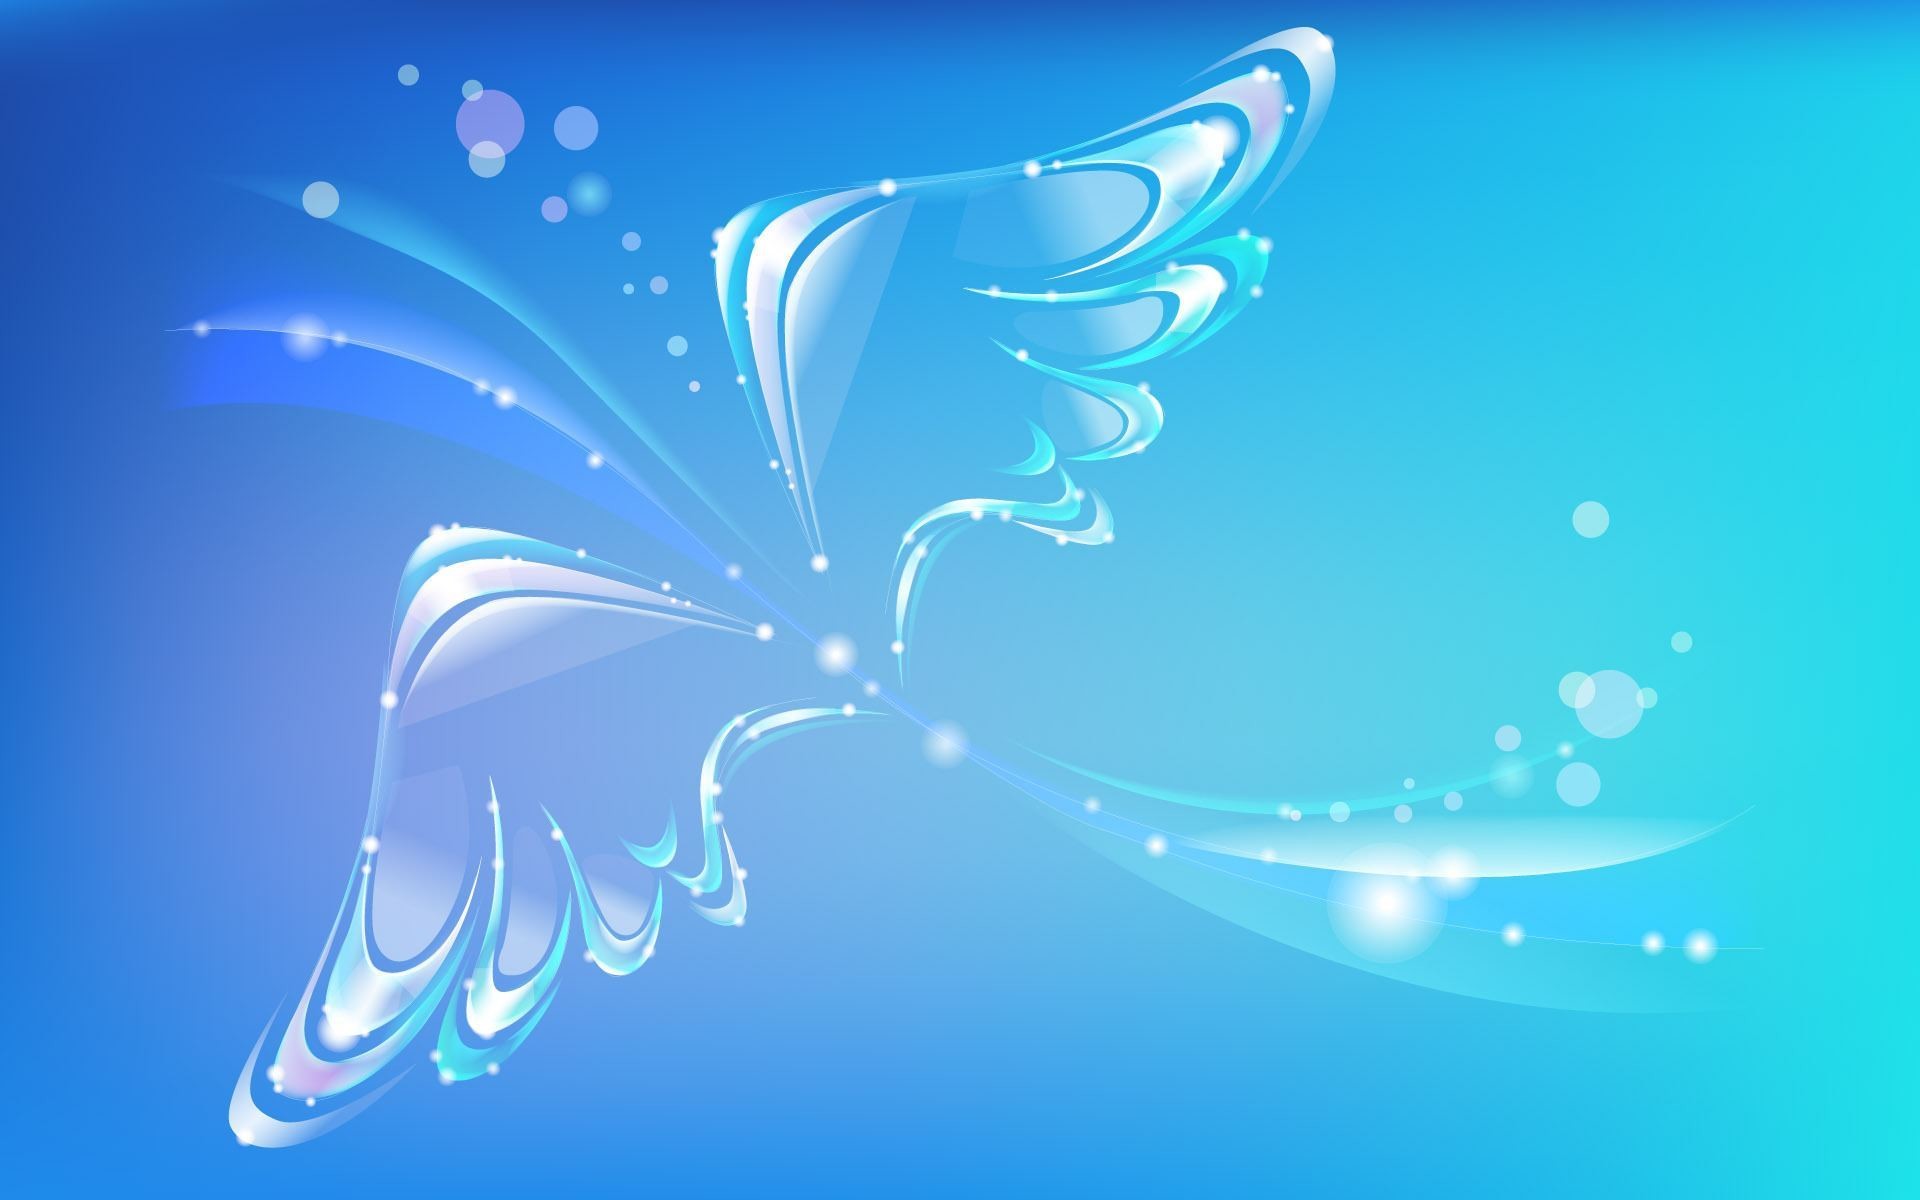 Butterfly Abstract Hd Widescreen Backgrounds 1920x1200